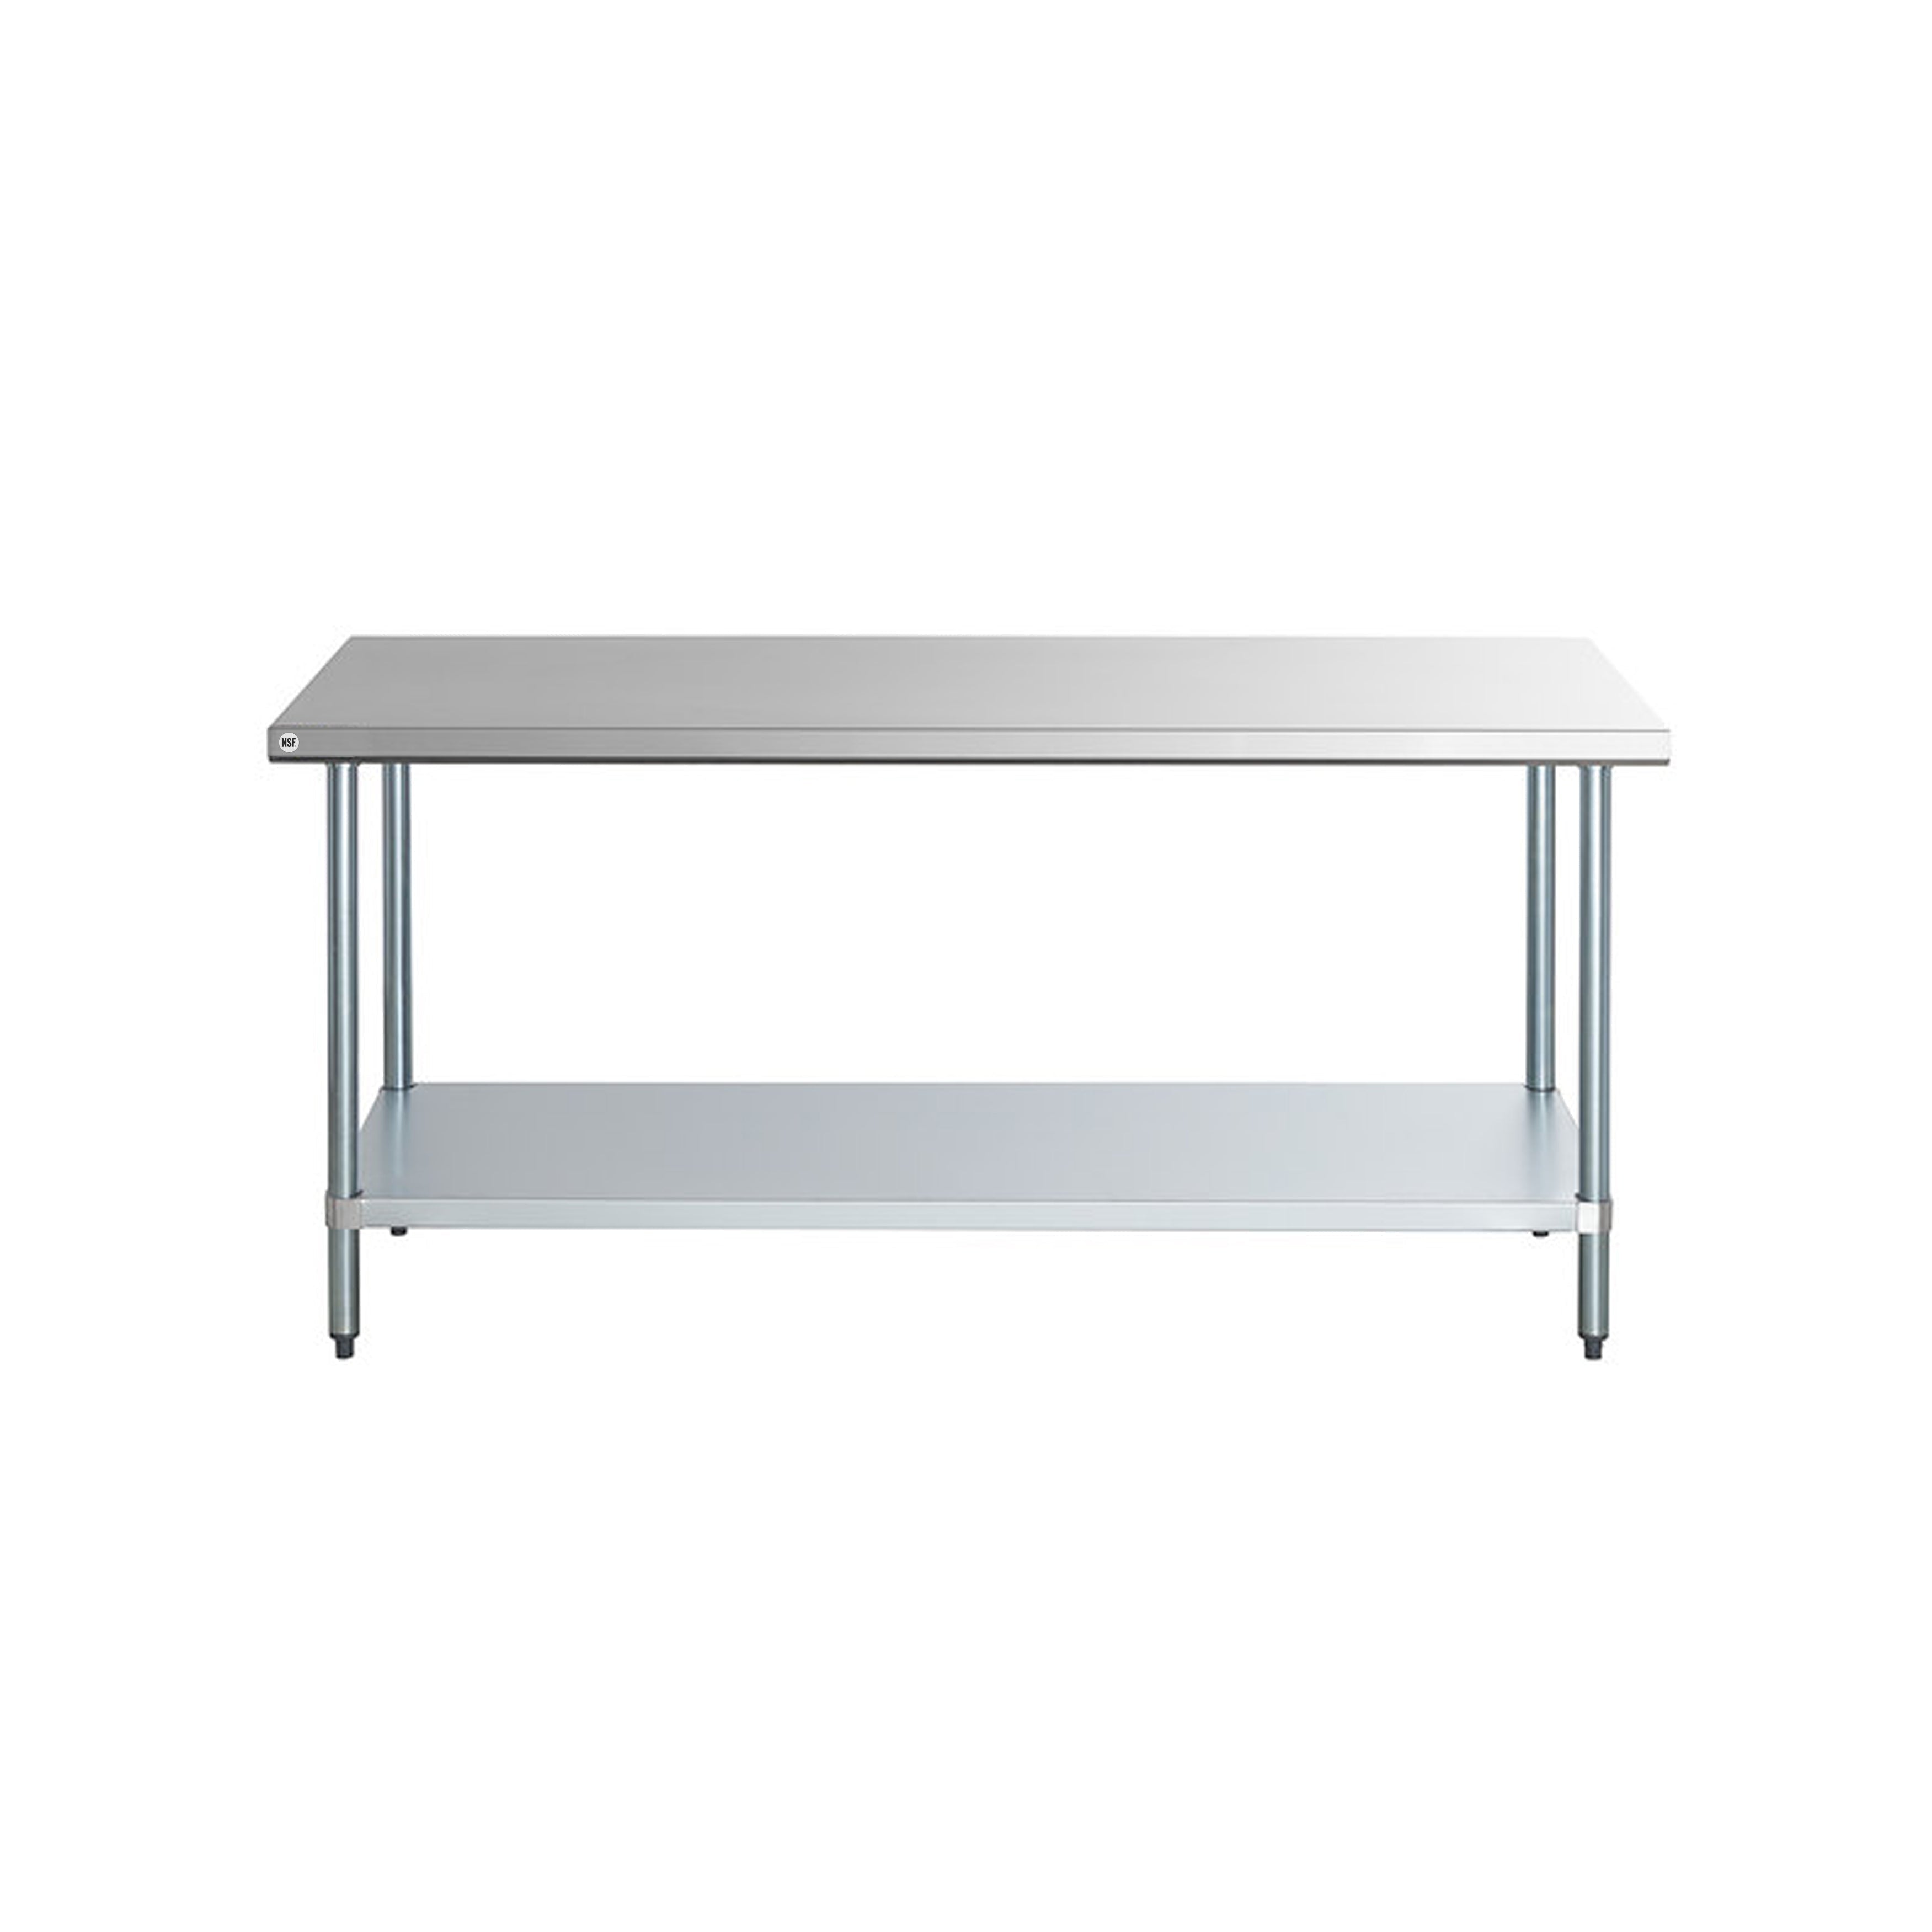 Omcan - 17587, Commercial 60" x 30" Stainless Steel Kitchen Work Table 1200lbs Medium Duty